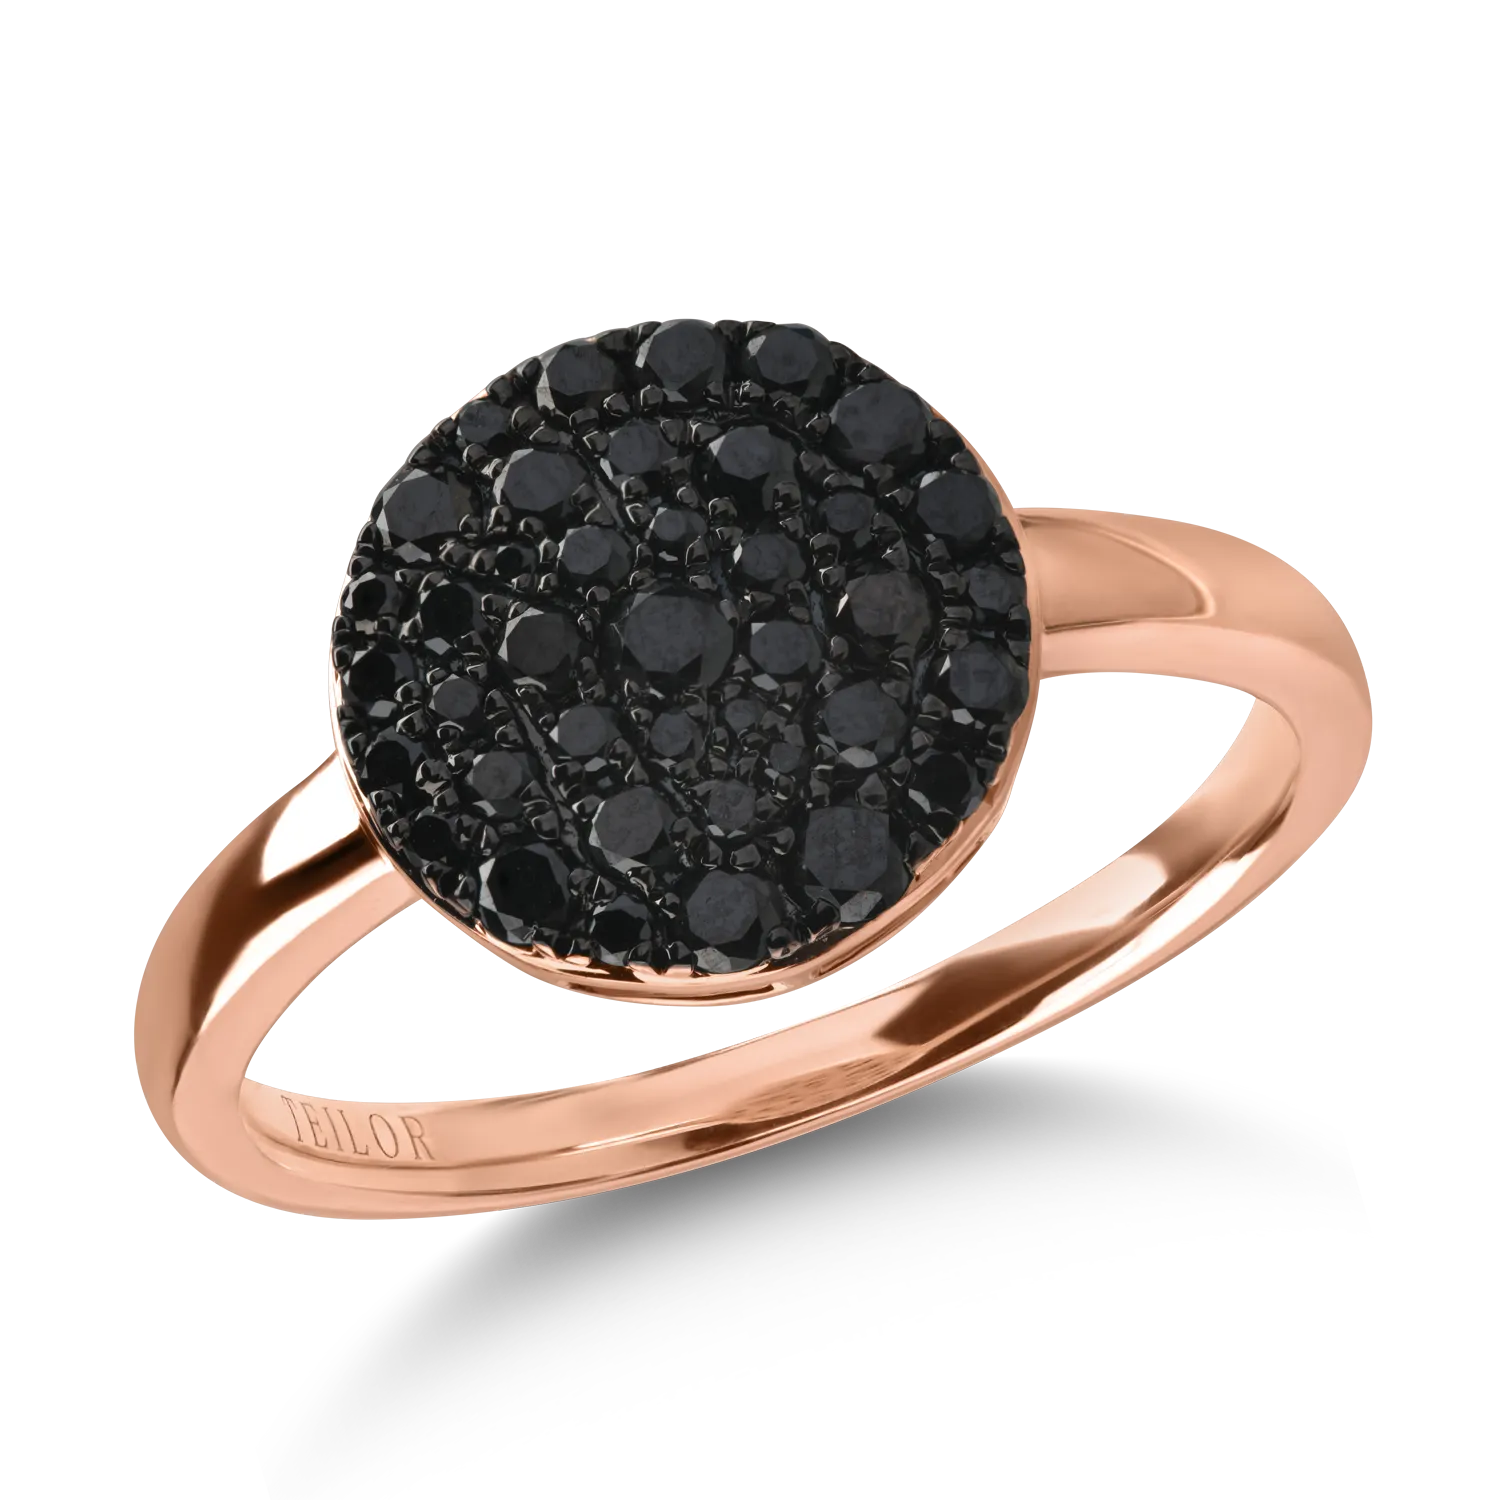 Rose gold ring with 0.59ct black diamonds